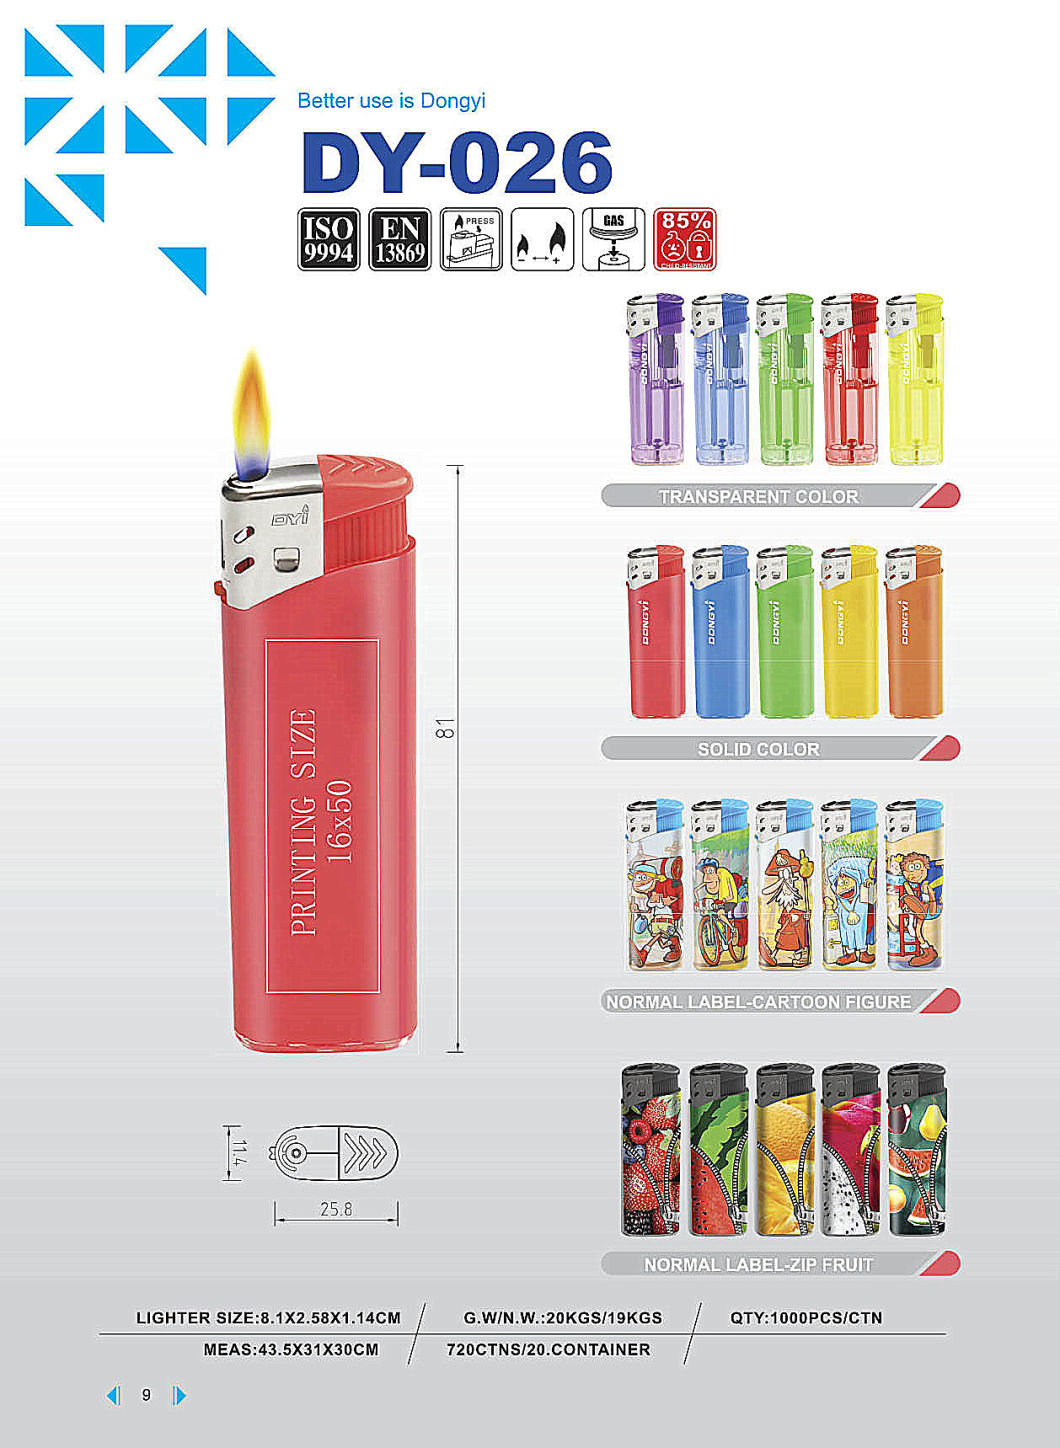 EUR Standard High Quality Hot Sale Classic Fashion Electric Gas Lighter Dy-026